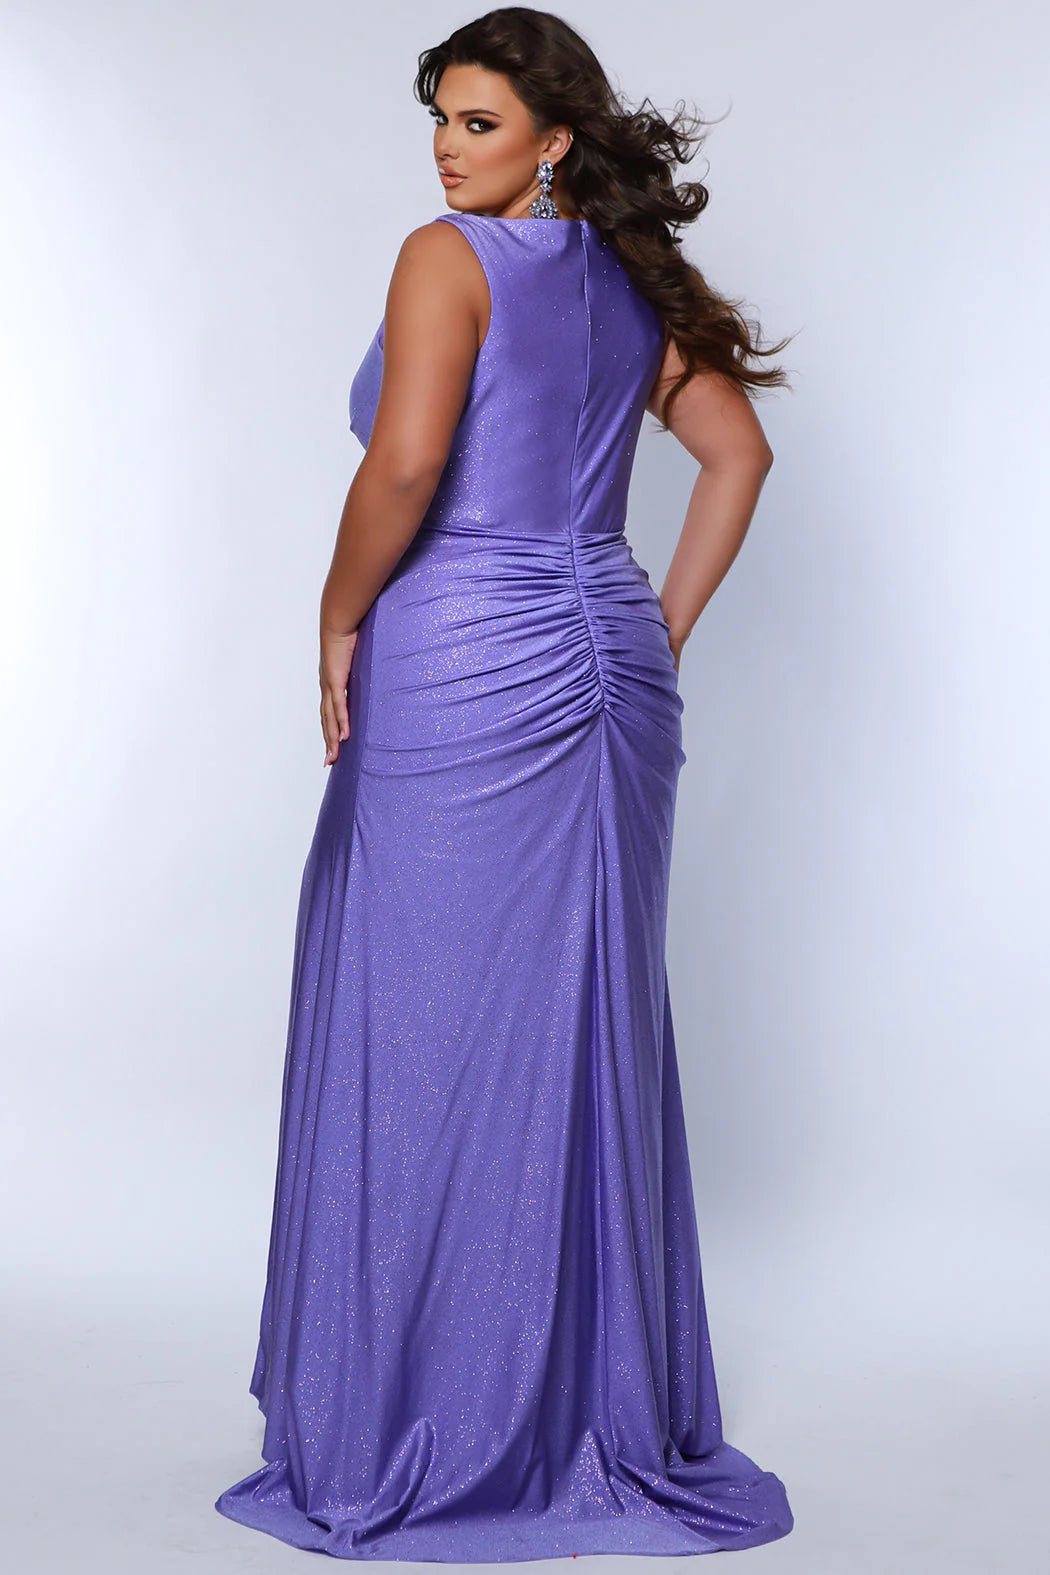 This Sydneys Closet SC7369 Plus Size Prom Dress will make you look amazing at your formal event. It features a stunning V neckline, with an elegant ruched back and a slit train. The fabric is comfortable and the slim fit is designed to flatter curves. Make a lasting impression at your special event! 